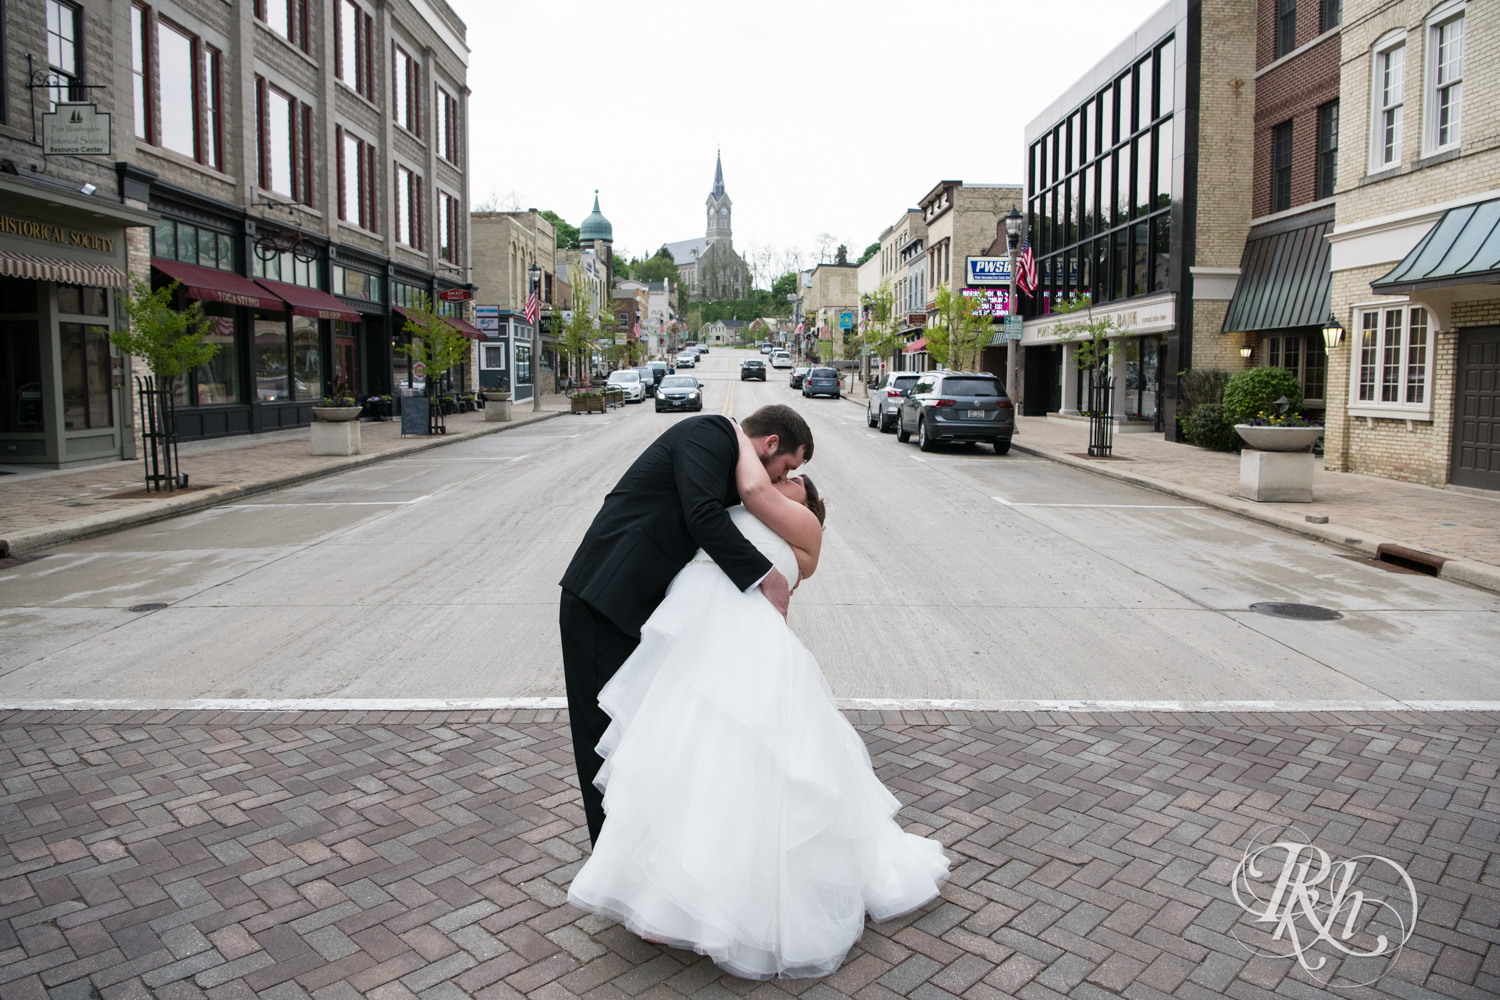 Bride and groom kiss in the street in Port Washington, Wisconsin